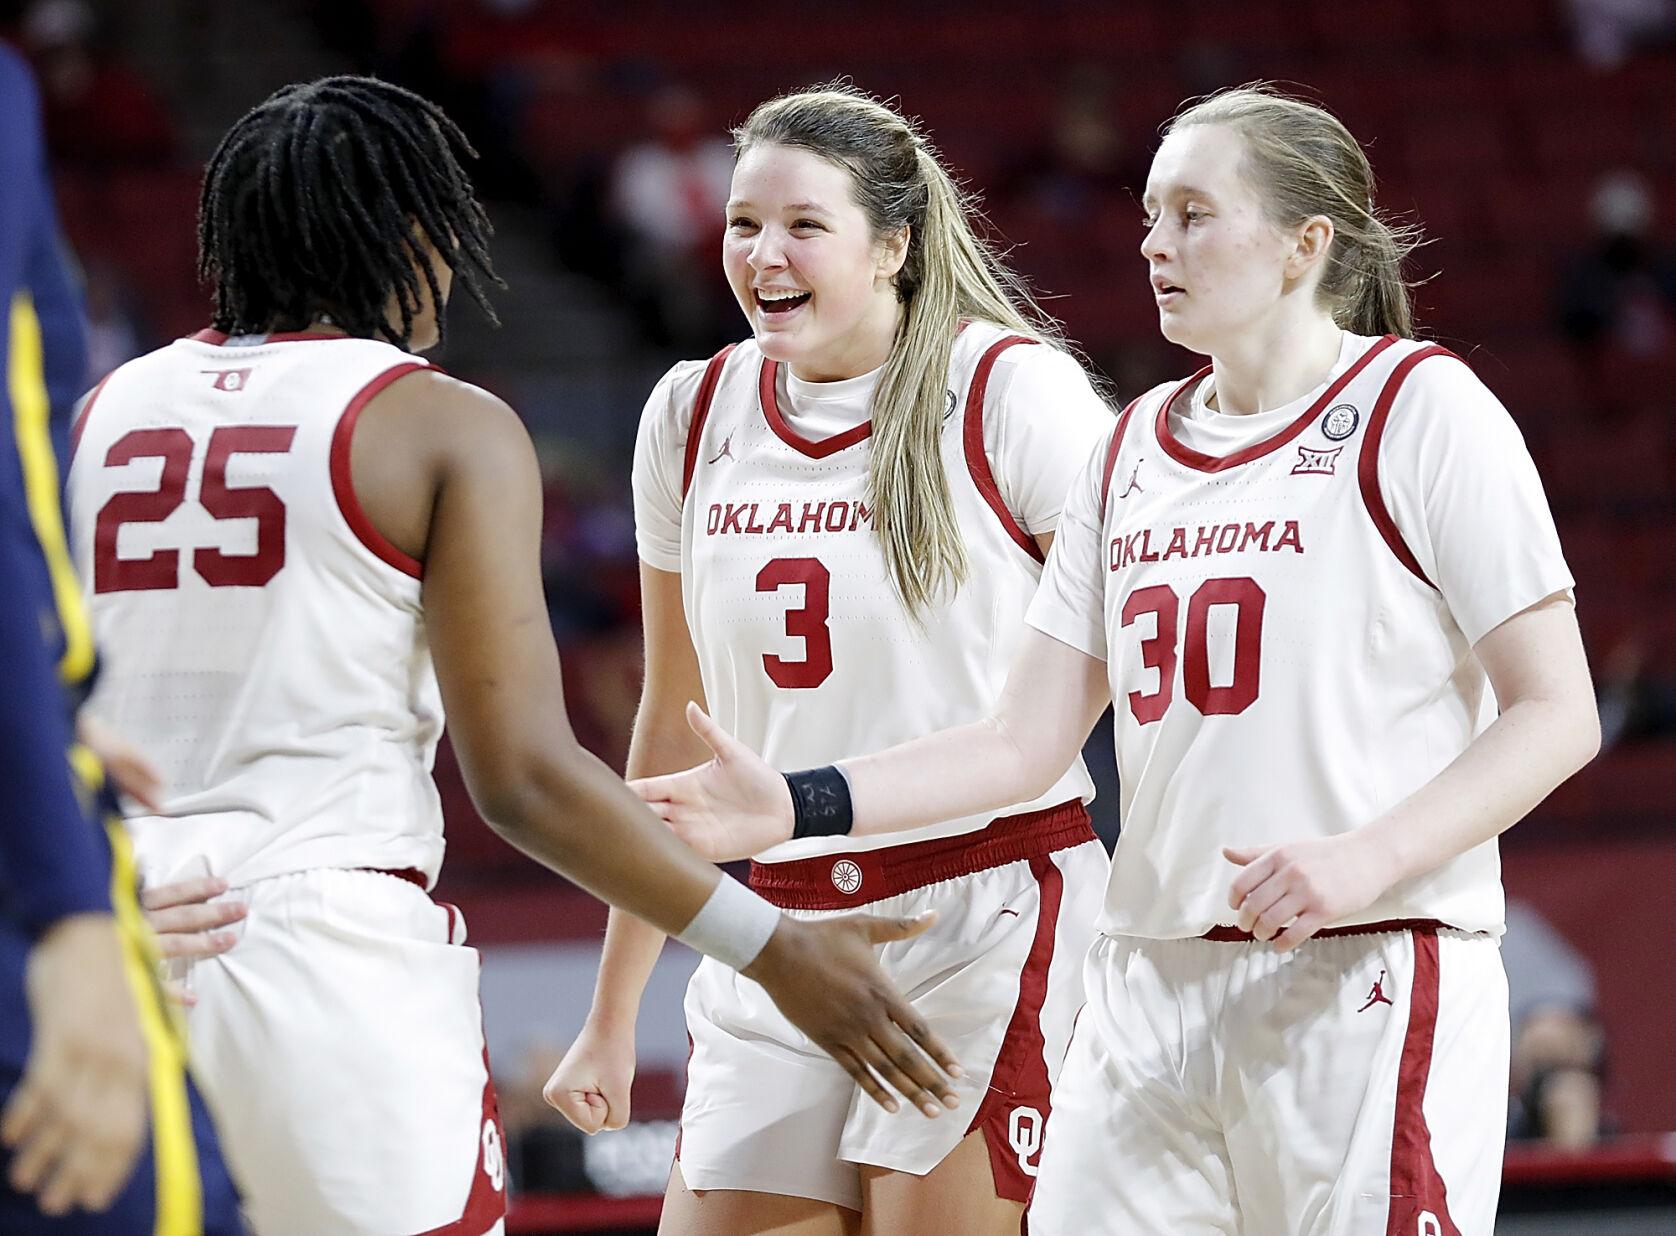 OU women's basketball Madi Williams scores record 45 in Sooners' loss